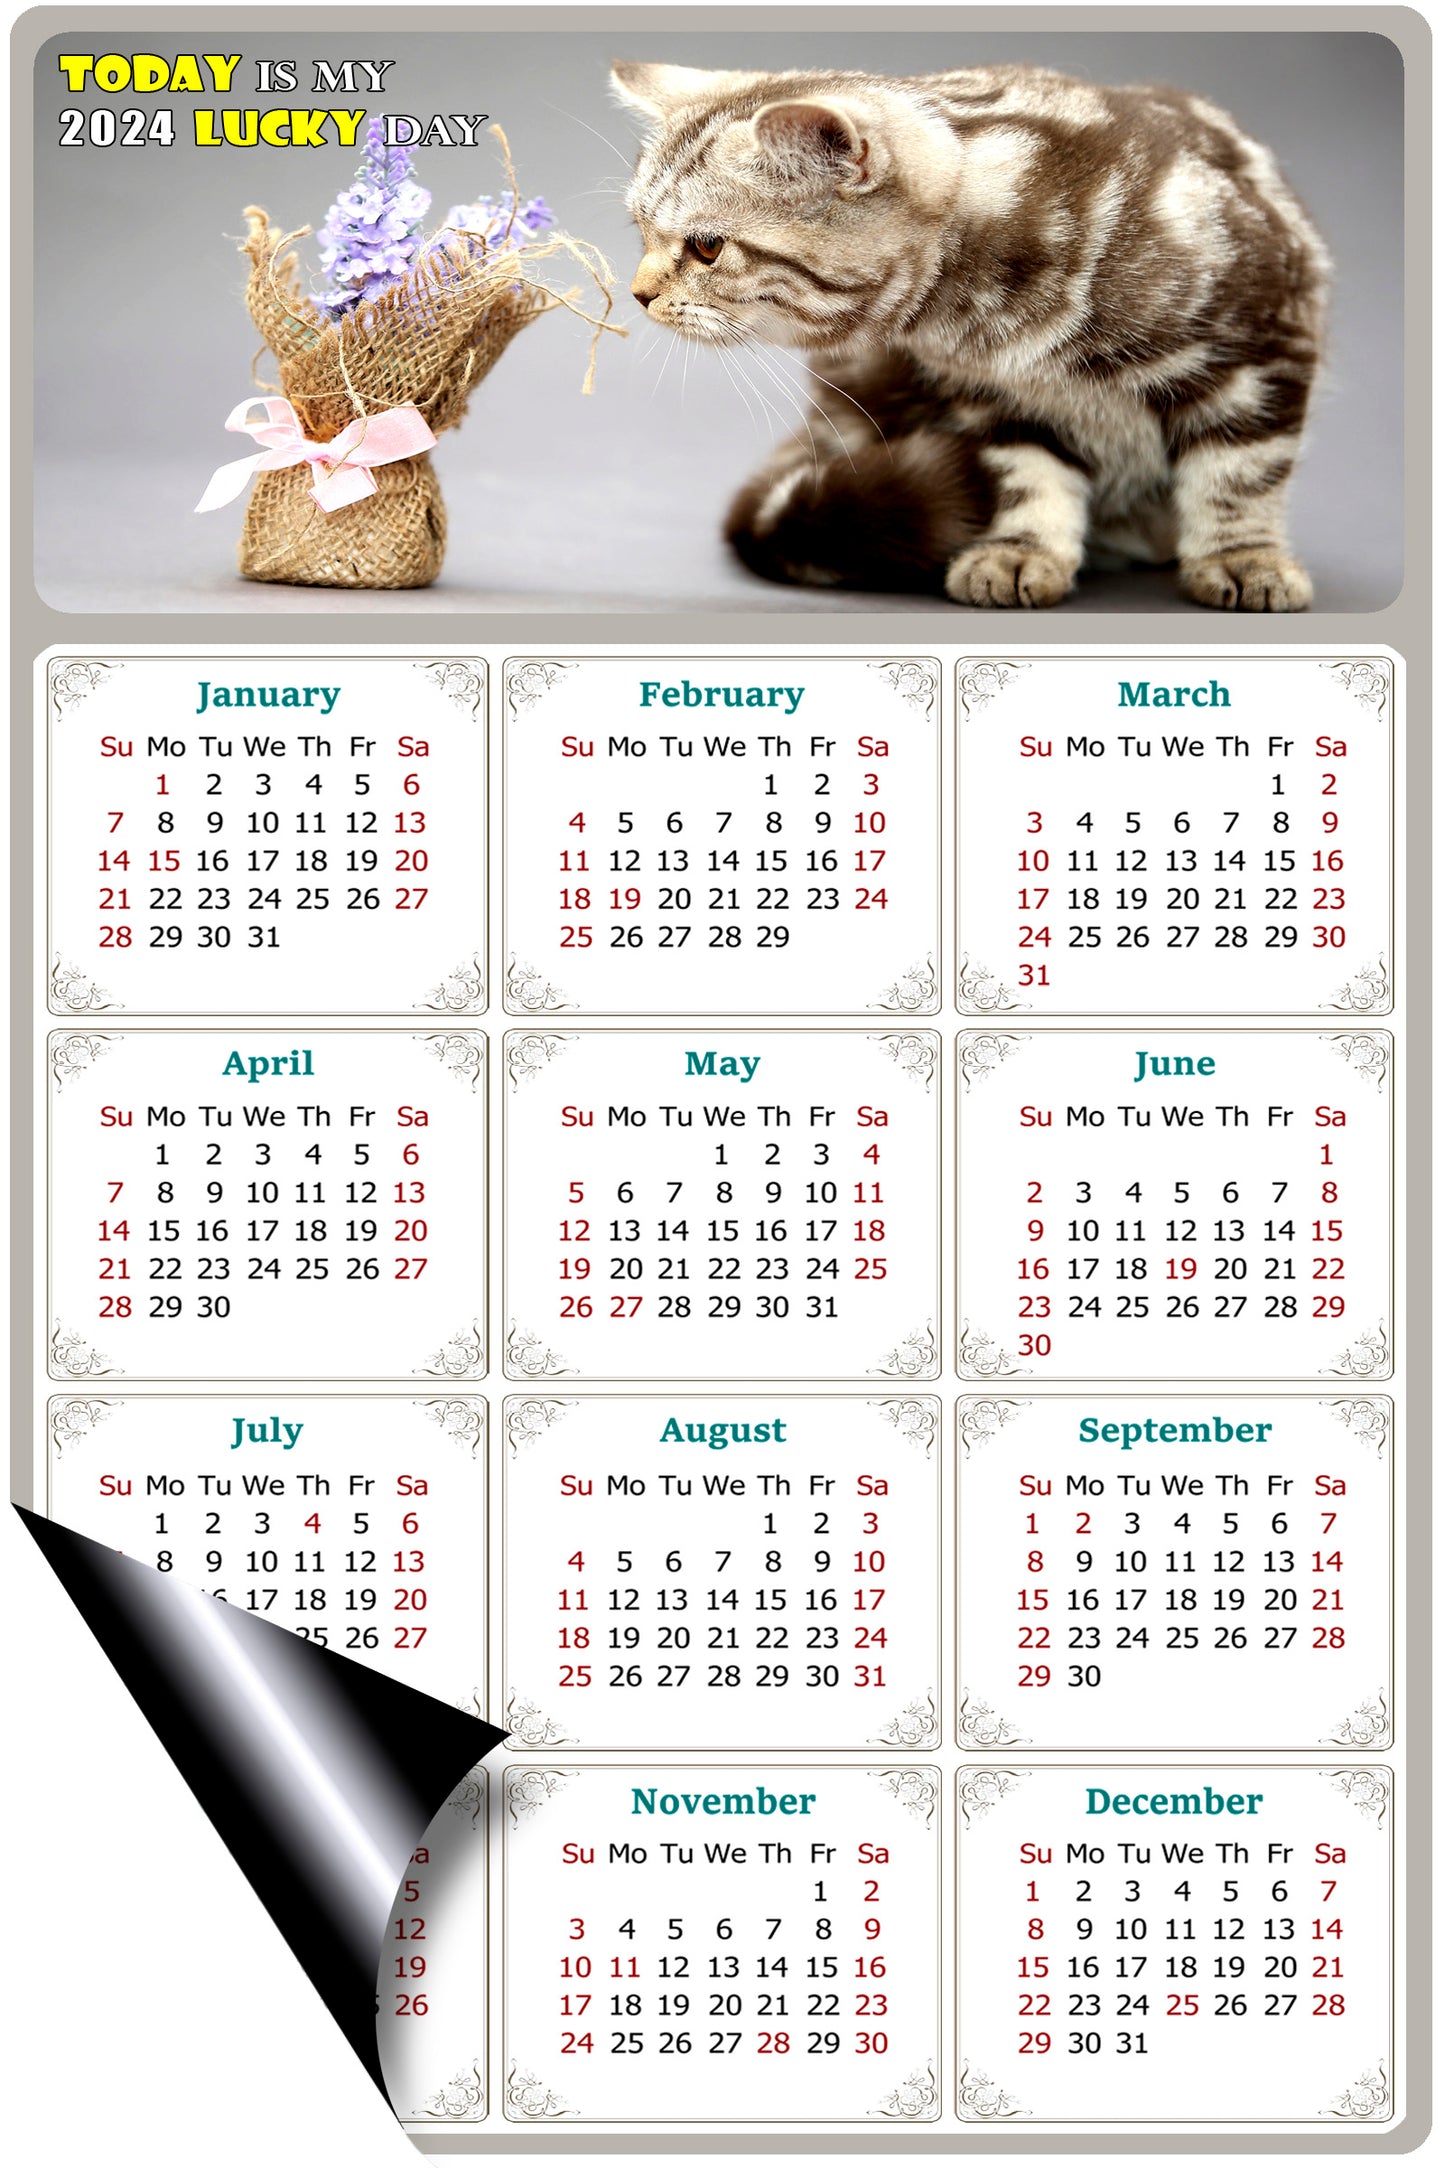 2024 Magnetic Calendar - Today is My Lucky Day (Fade, Tear, and Water Resistant)- Cat Themed 025